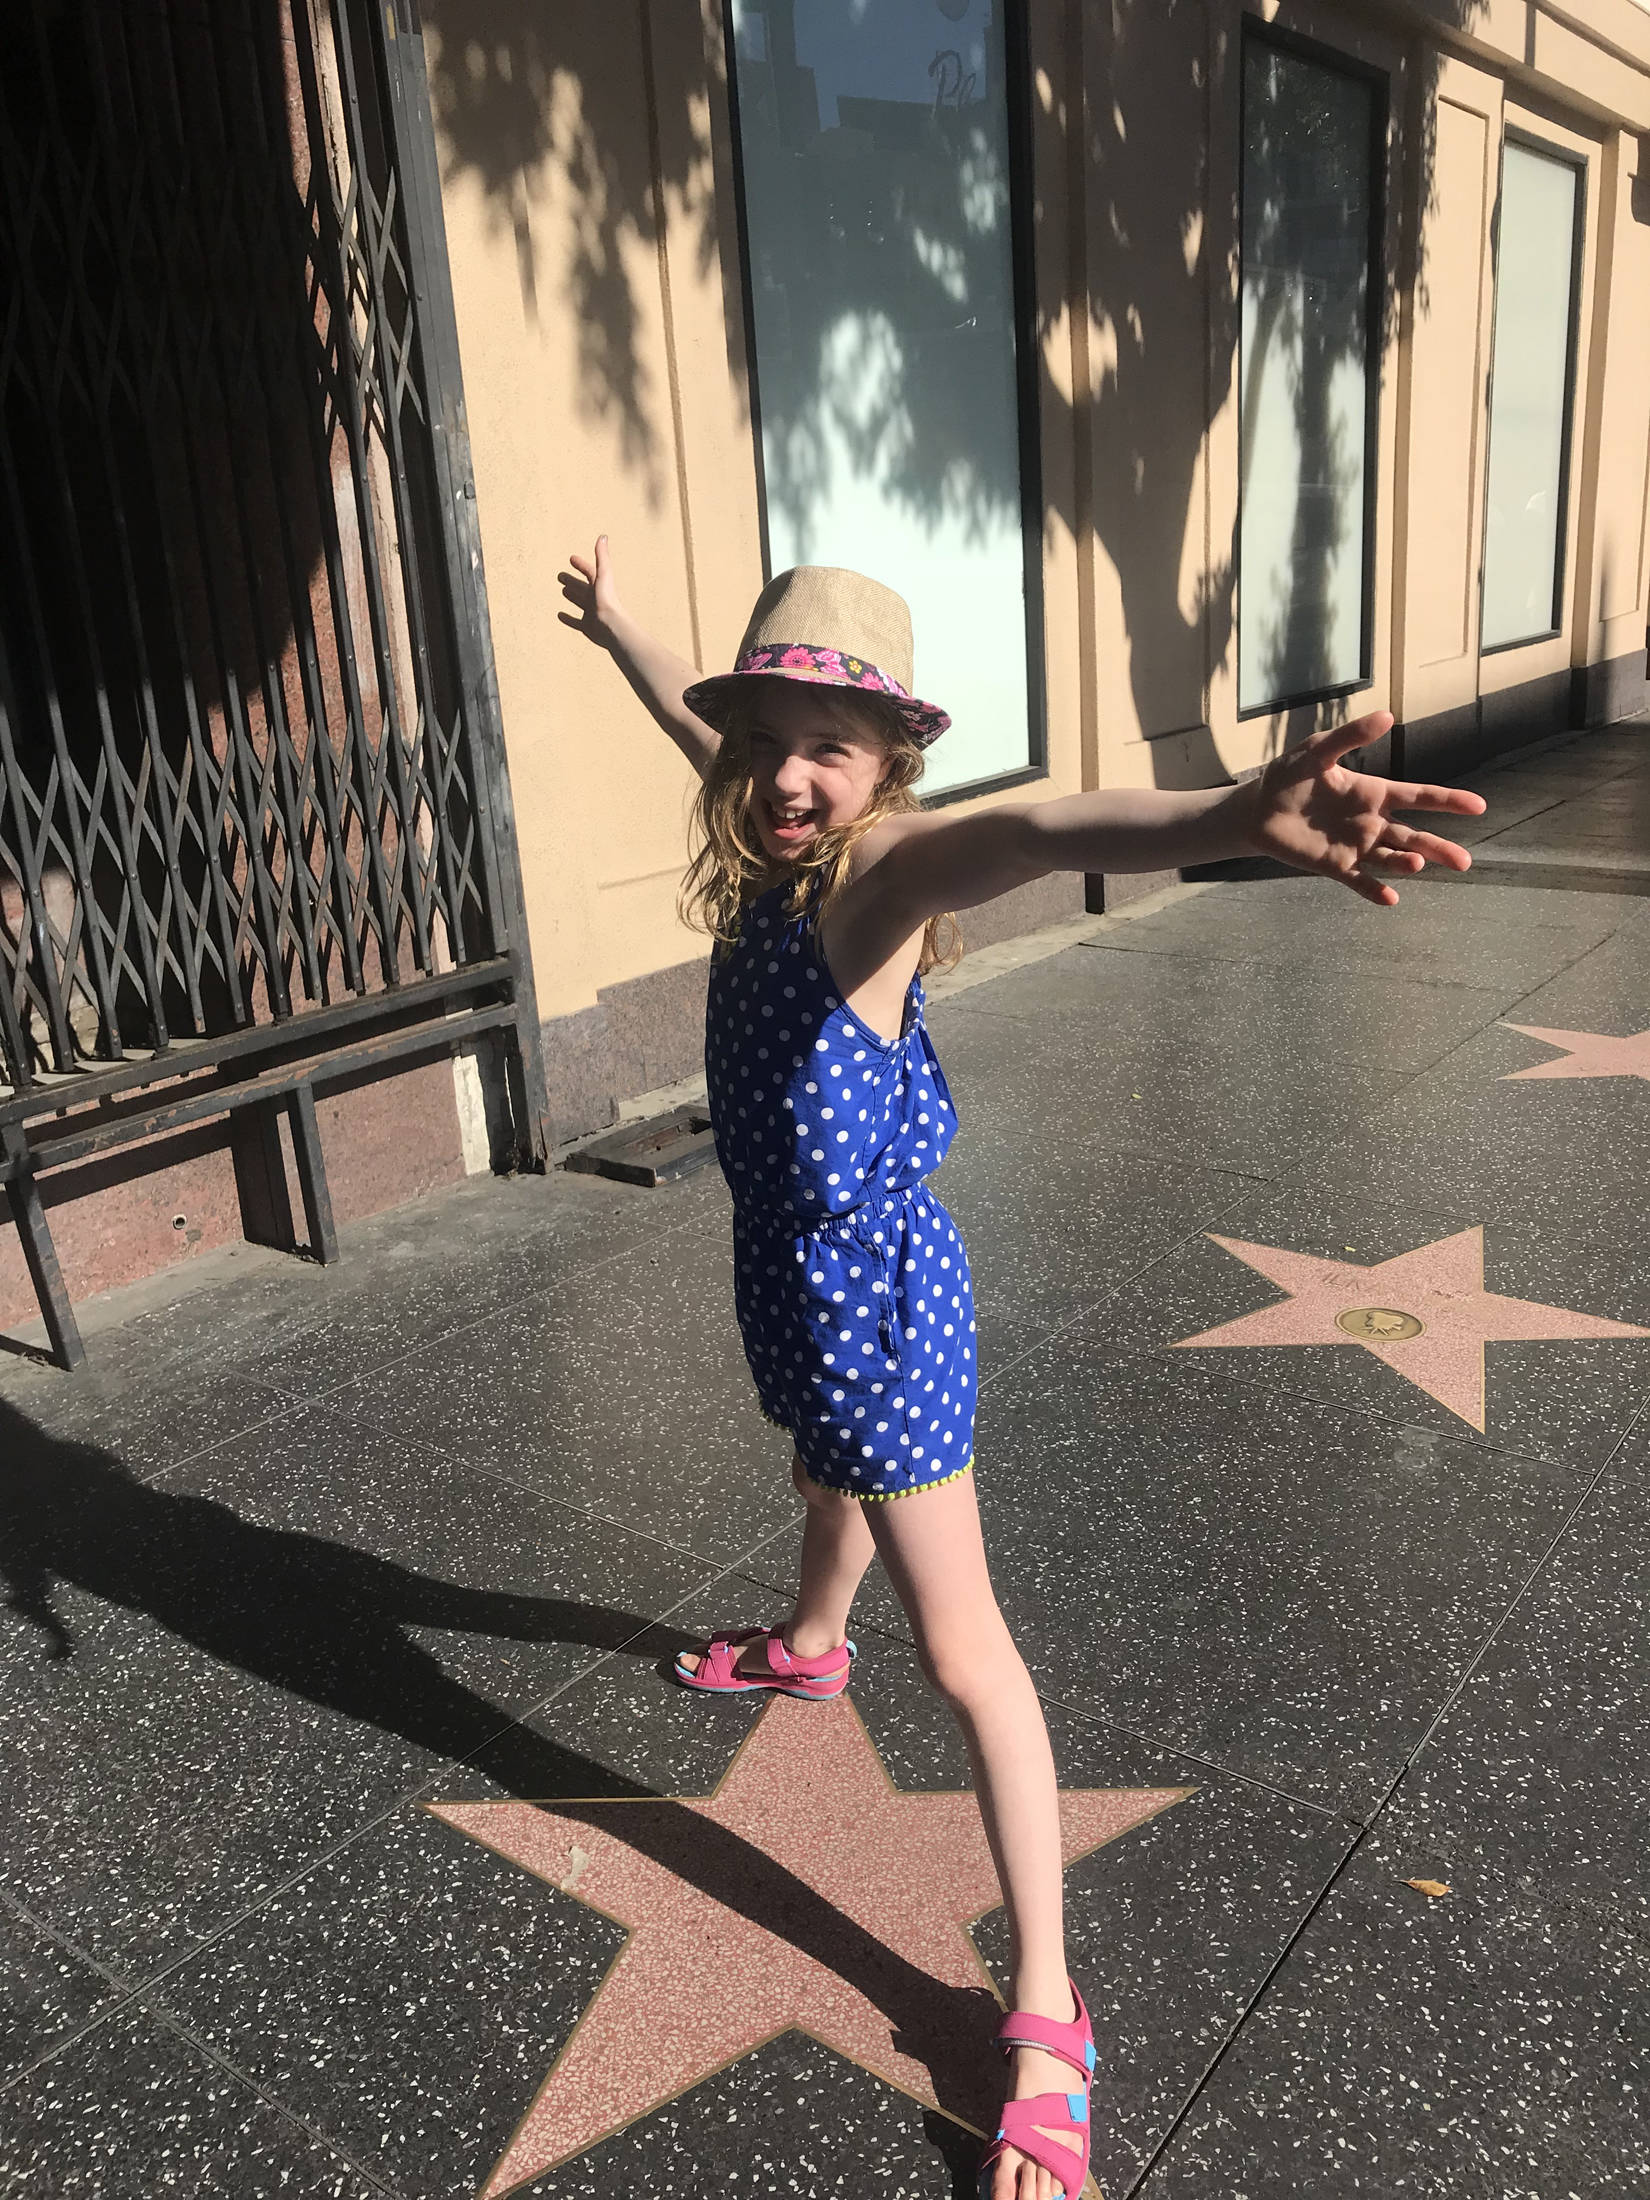 Siena Farr claims a blank star along the Hollywood Walk of Fame as her own. Courtesy of Clint J. Farr